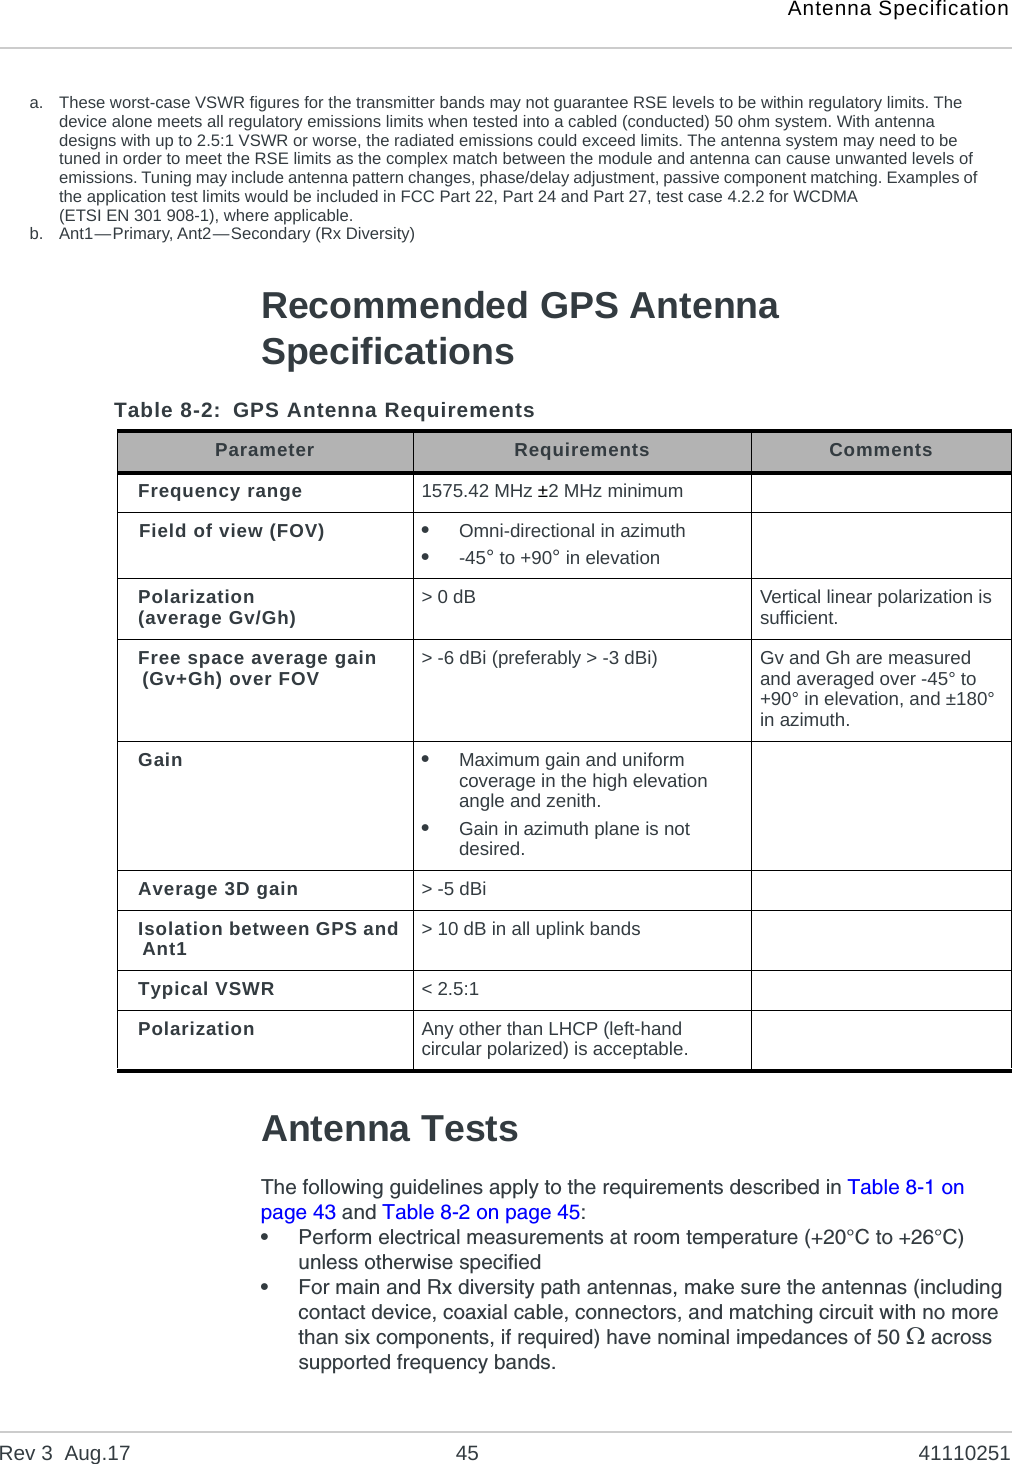 Antenna SpecificationRev 3  Aug.17 45 41110251Recommended GPS Antenna SpecificationsAntenna TestsThe following guidelines apply to the requirements described in Table 8-1 on page 43 and Table 8-2 on page 45:•Perform electrical measurements at room temperature (+20°C to +26°C) unless otherwise specified•For main and Rx diversity path antennas, make sure the antennas (including contact device, coaxial cable, connectors, and matching circuit with no more than six components, if required) have nominal impedances of 50  across supported frequency bands.a. These worst-case VSWR figures for the transmitter bands may not guarantee RSE levels to be within regulatory limits. The device alone meets all regulatory emissions limits when tested into a cabled (conducted) 50 ohm system. With antenna designs with up to 2.5:1 VSWR or worse, the radiated emissions could exceed limits. The antenna system may need to be tuned in order to meet the RSE limits as the complex match between the module and antenna can cause unwanted levels of emissions. Tuning may include antenna pattern changes, phase/delay adjustment, passive component matching. Examples of the application test limits would be included in FCC Part 22, Part 24 and Part 27, test case 4.2.2 for WCDMA (ETSI EN 301 908-1), where applicable.b. Ant1—Primary, Ant2—Secondary (Rx Diversity)Table 8-2: GPS Antenna RequirementsParameter Requirements CommentsFrequency range 1575.42 MHz ±2MHz minimumField of view (FOV) •Omni-directional in azimuth•-45° to +90° in elevationPolarization(average Gv/Gh) &gt;0dB Vertical linear polarization is sufficient.Free space average gain (Gv+Gh) over FOV &gt; -6 dBi (preferably &gt; -3 dBi) Gv and Gh are measured and averaged over -45° to +90° in elevation, and ±180° in azimuth.Gain •Maximum gain and uniform coverage in the high elevation angle and zenith.•Gain in azimuth plane is not desired.Average 3D gain &gt;-5dBiIsolation between GPS and Ant1 &gt; 10 dB in all uplink bandsTypical VSWR &lt; 2.5:1Polarization Any other than LHCP (left-hand circular polarized) is acceptable.